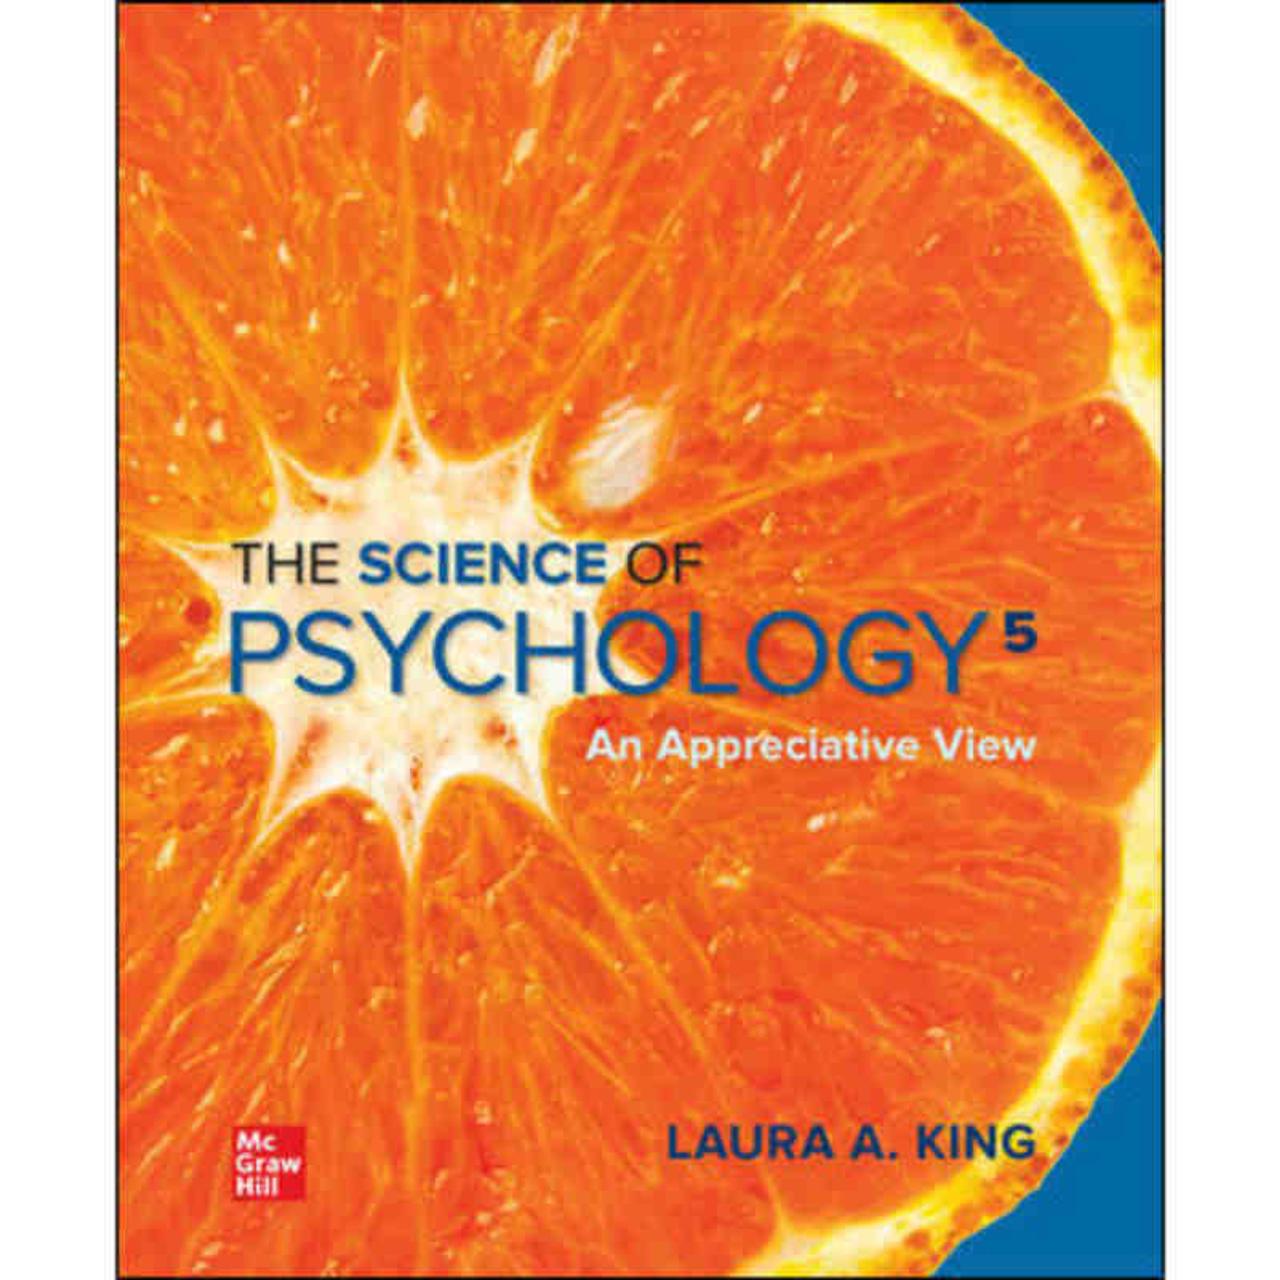 The science of psychology: an appreciative view pdf